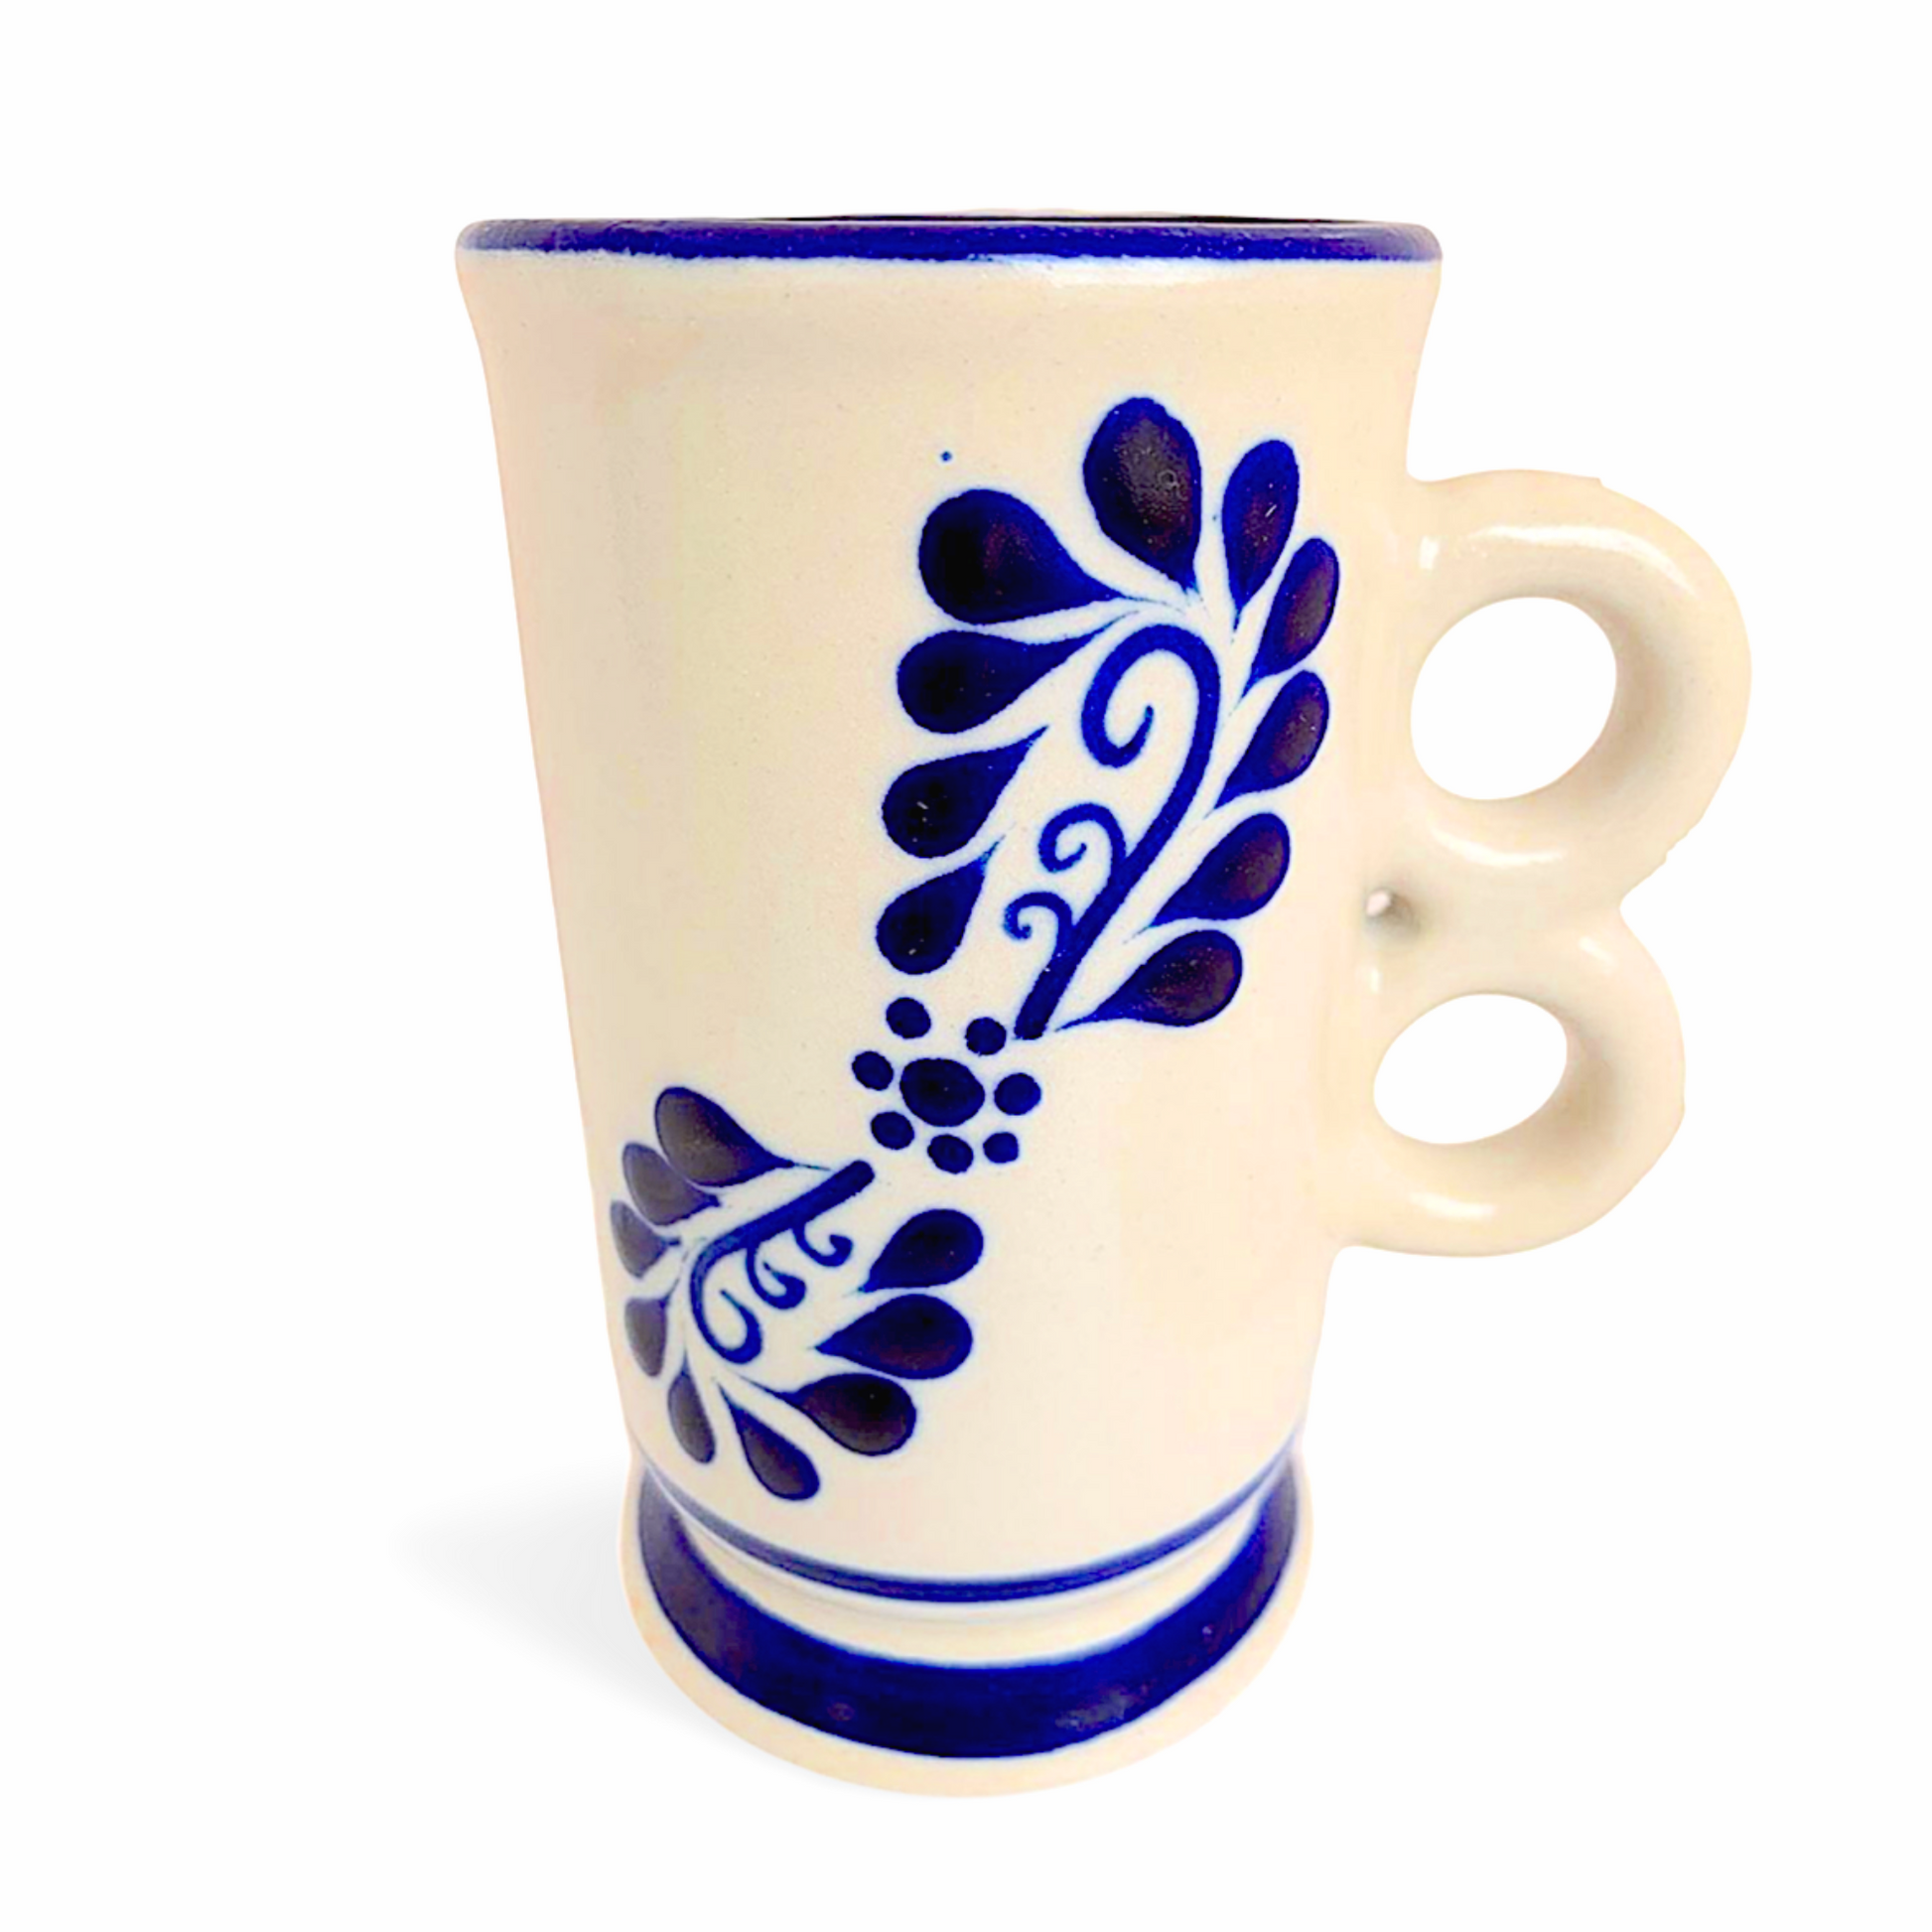 Large white ceramic Talavera Cappuccino Mug, hand-painted, handmade in Mexico, perfect for enjoying morning coffee or tea.